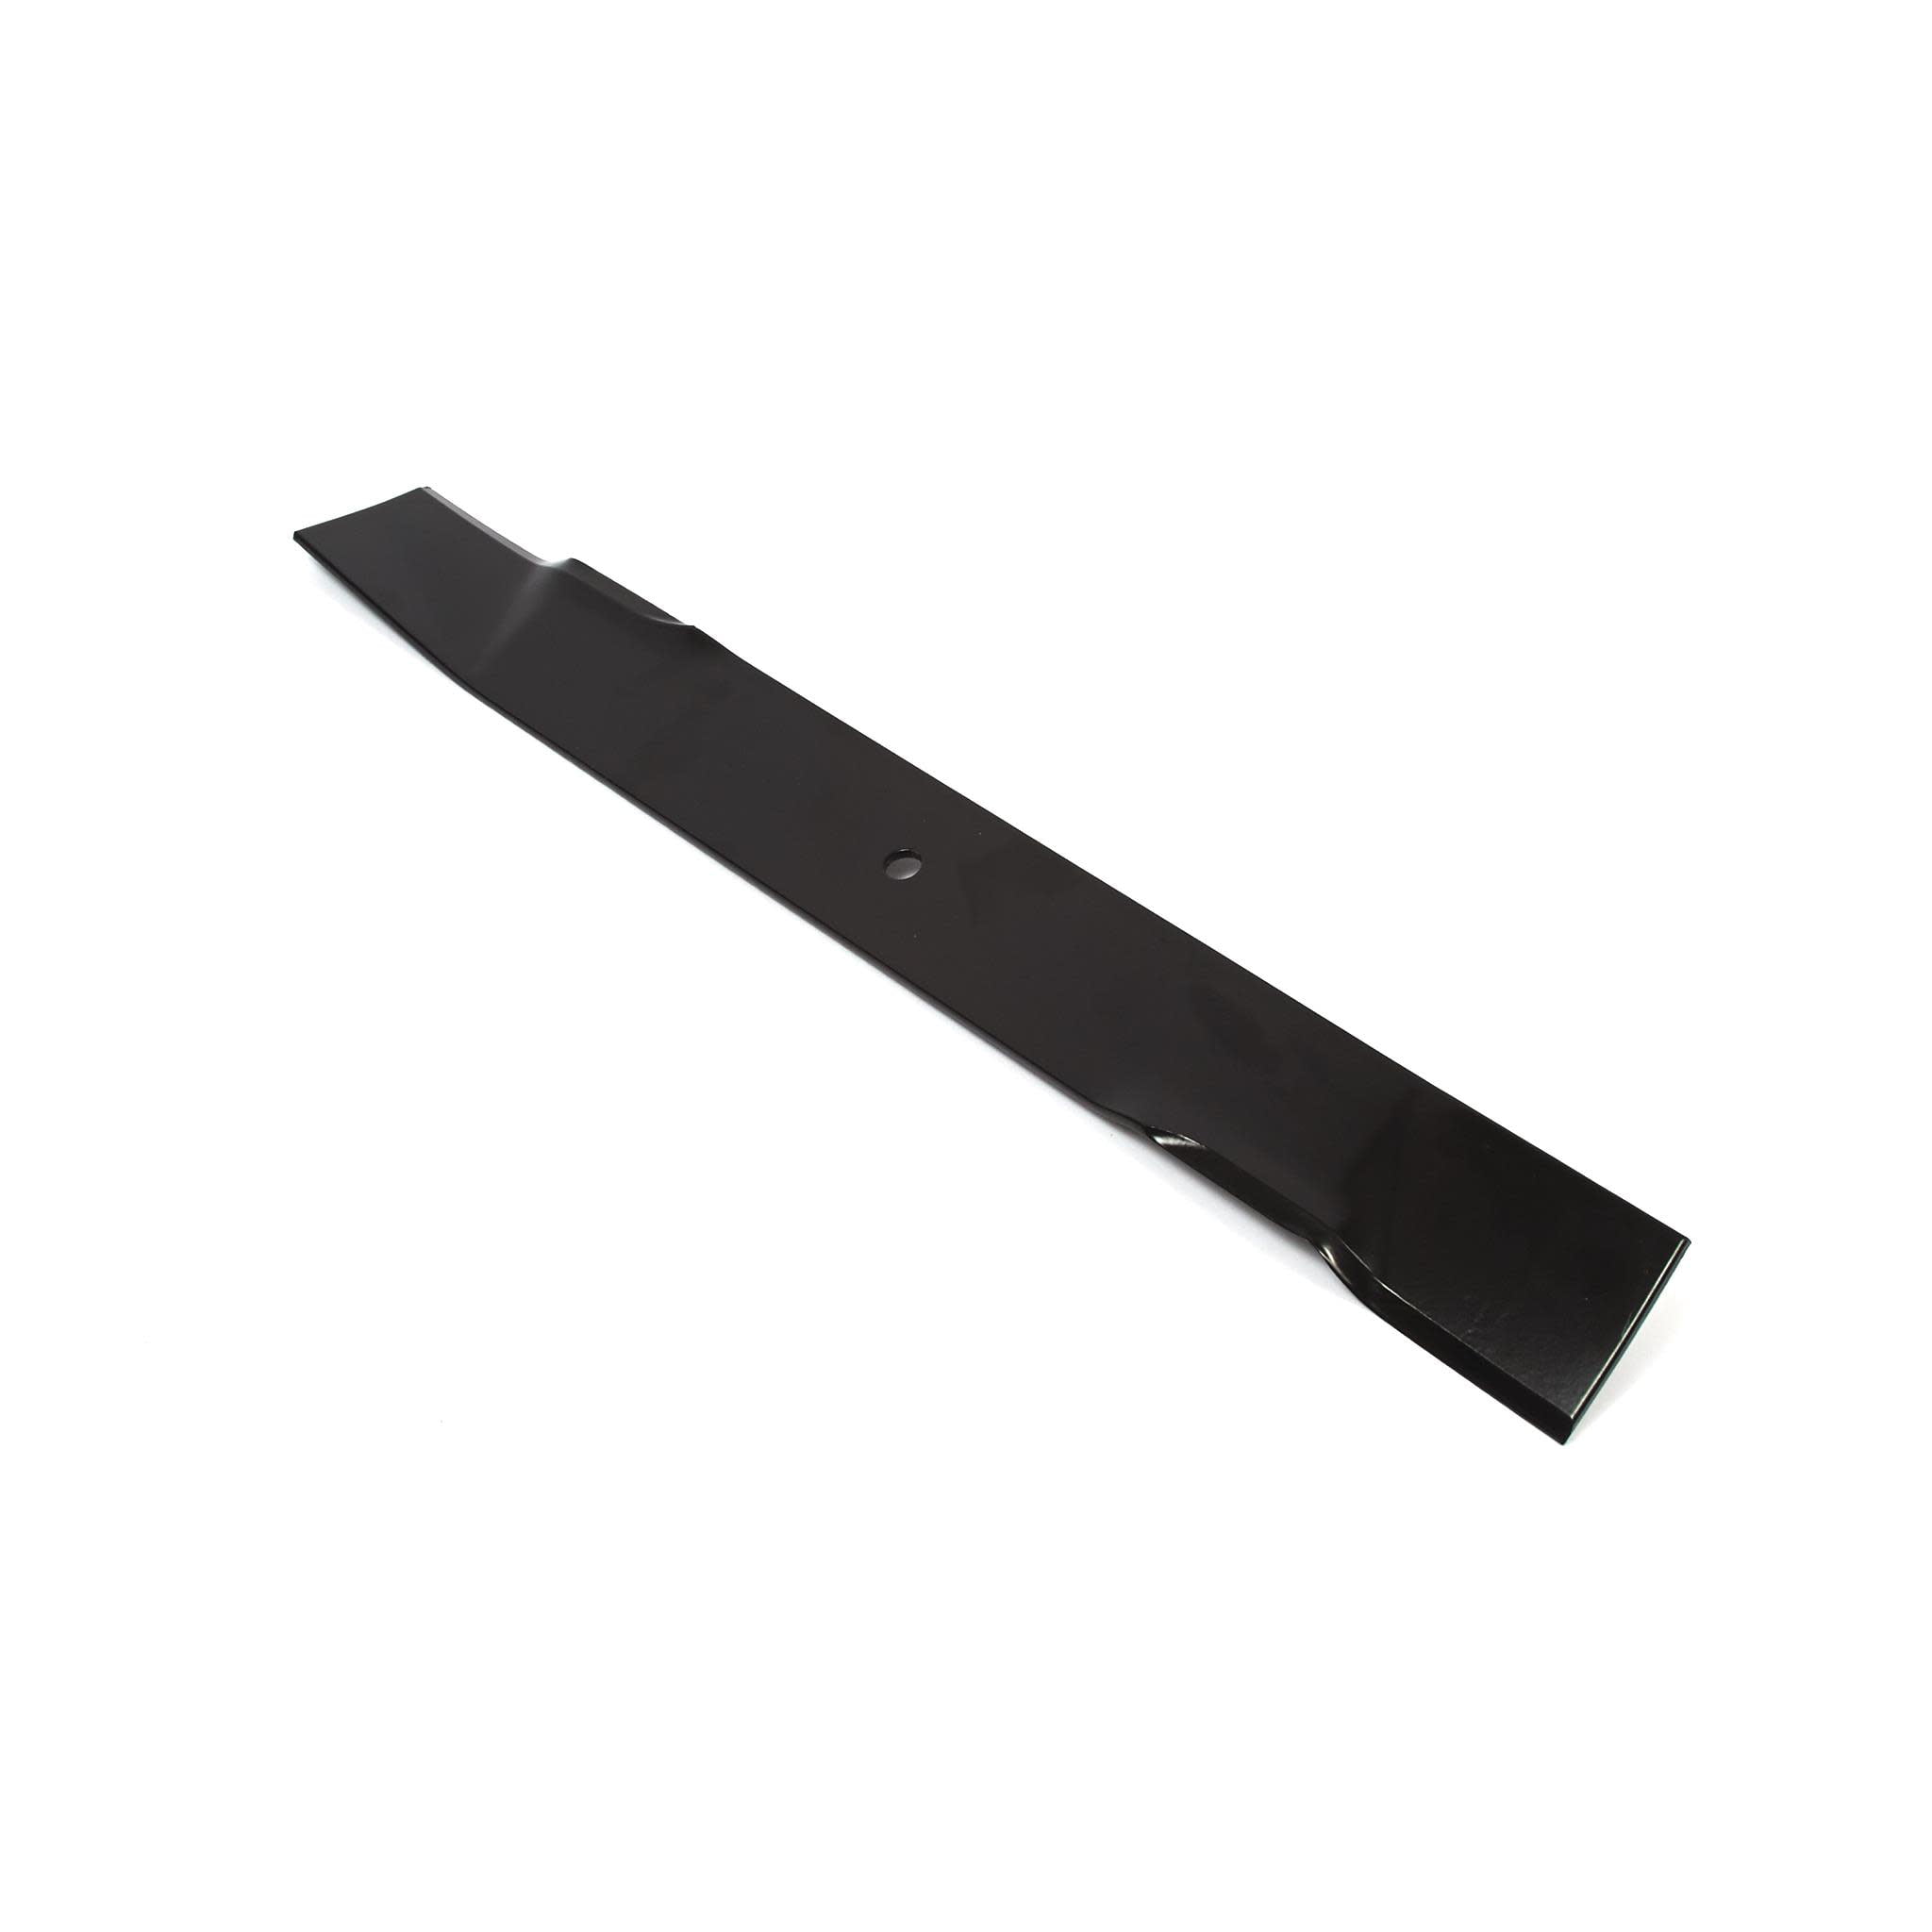 Oregon 97-022 Murray 3-In-1 Replacement Lawn Mower Blade 19-7/8-Inch 